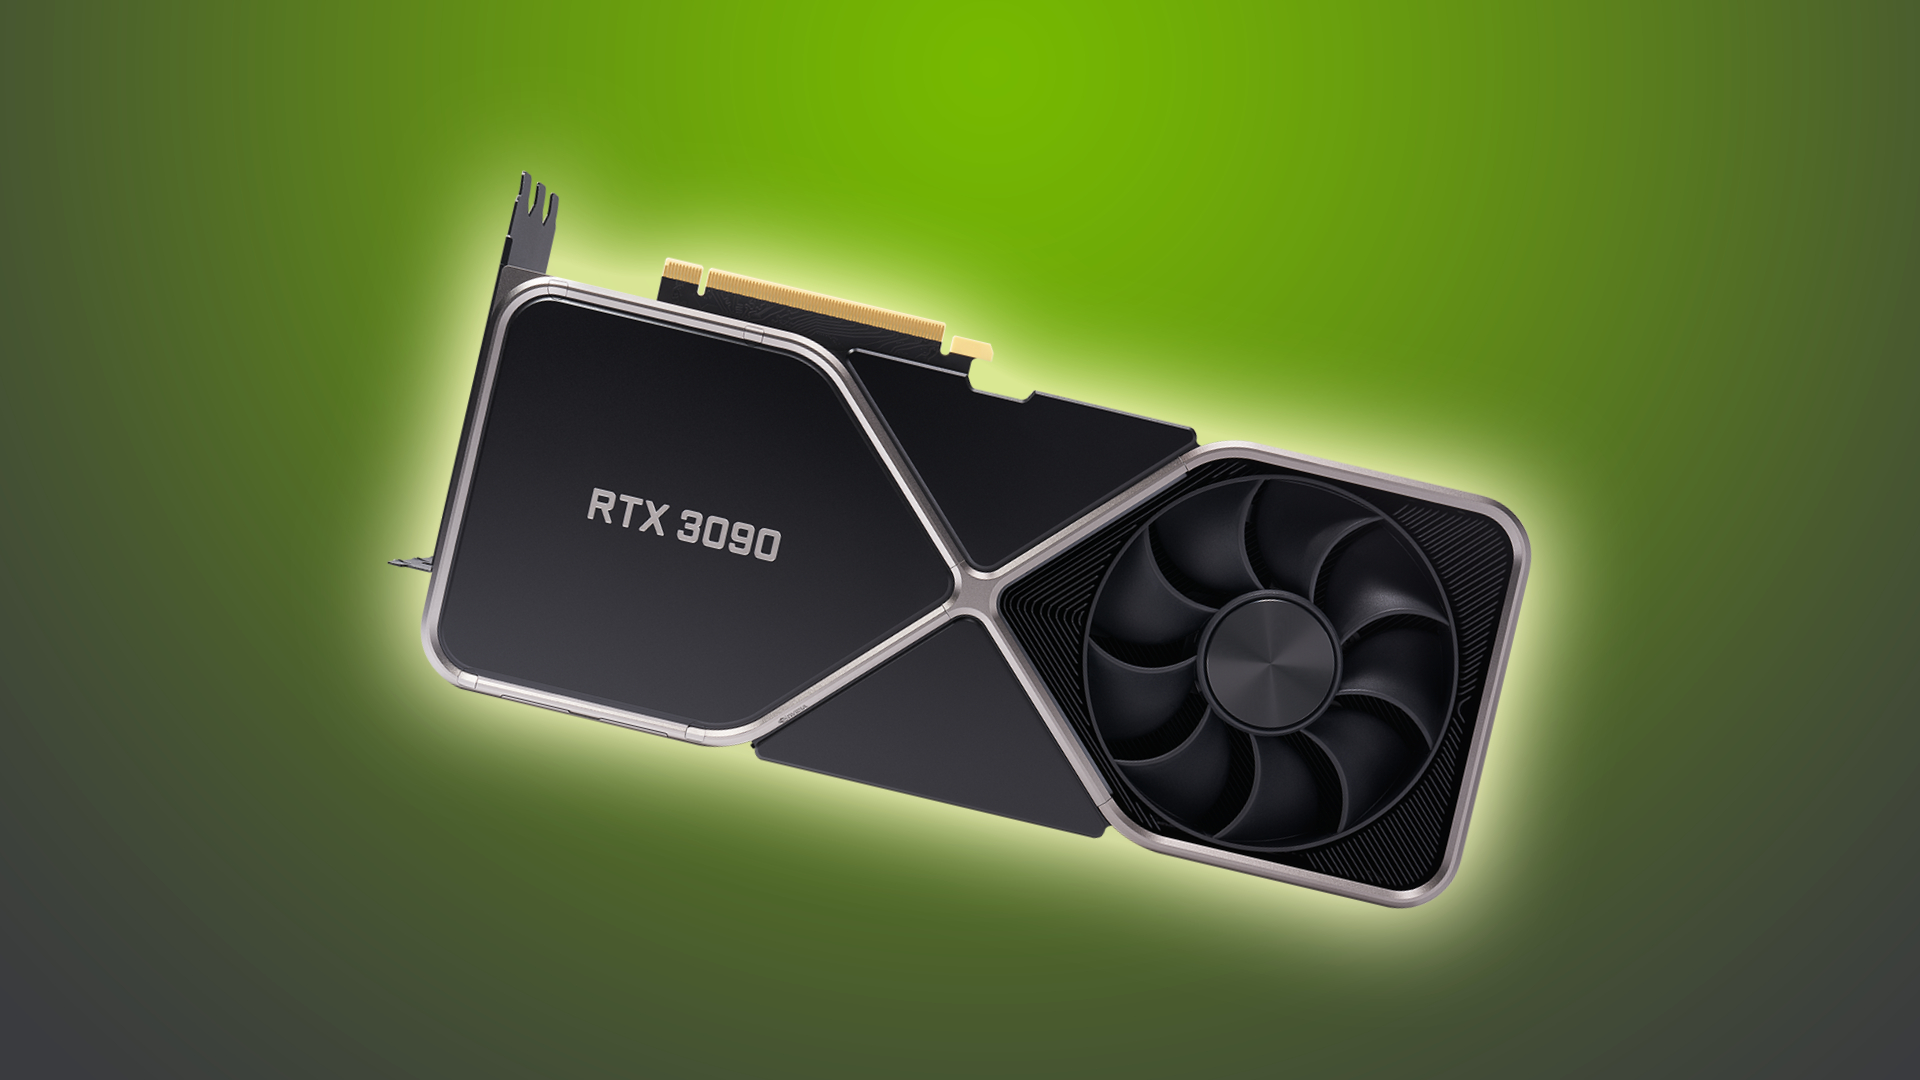 Nvidia GeForce RTX 3000 GPU prices could soon fall by 12%